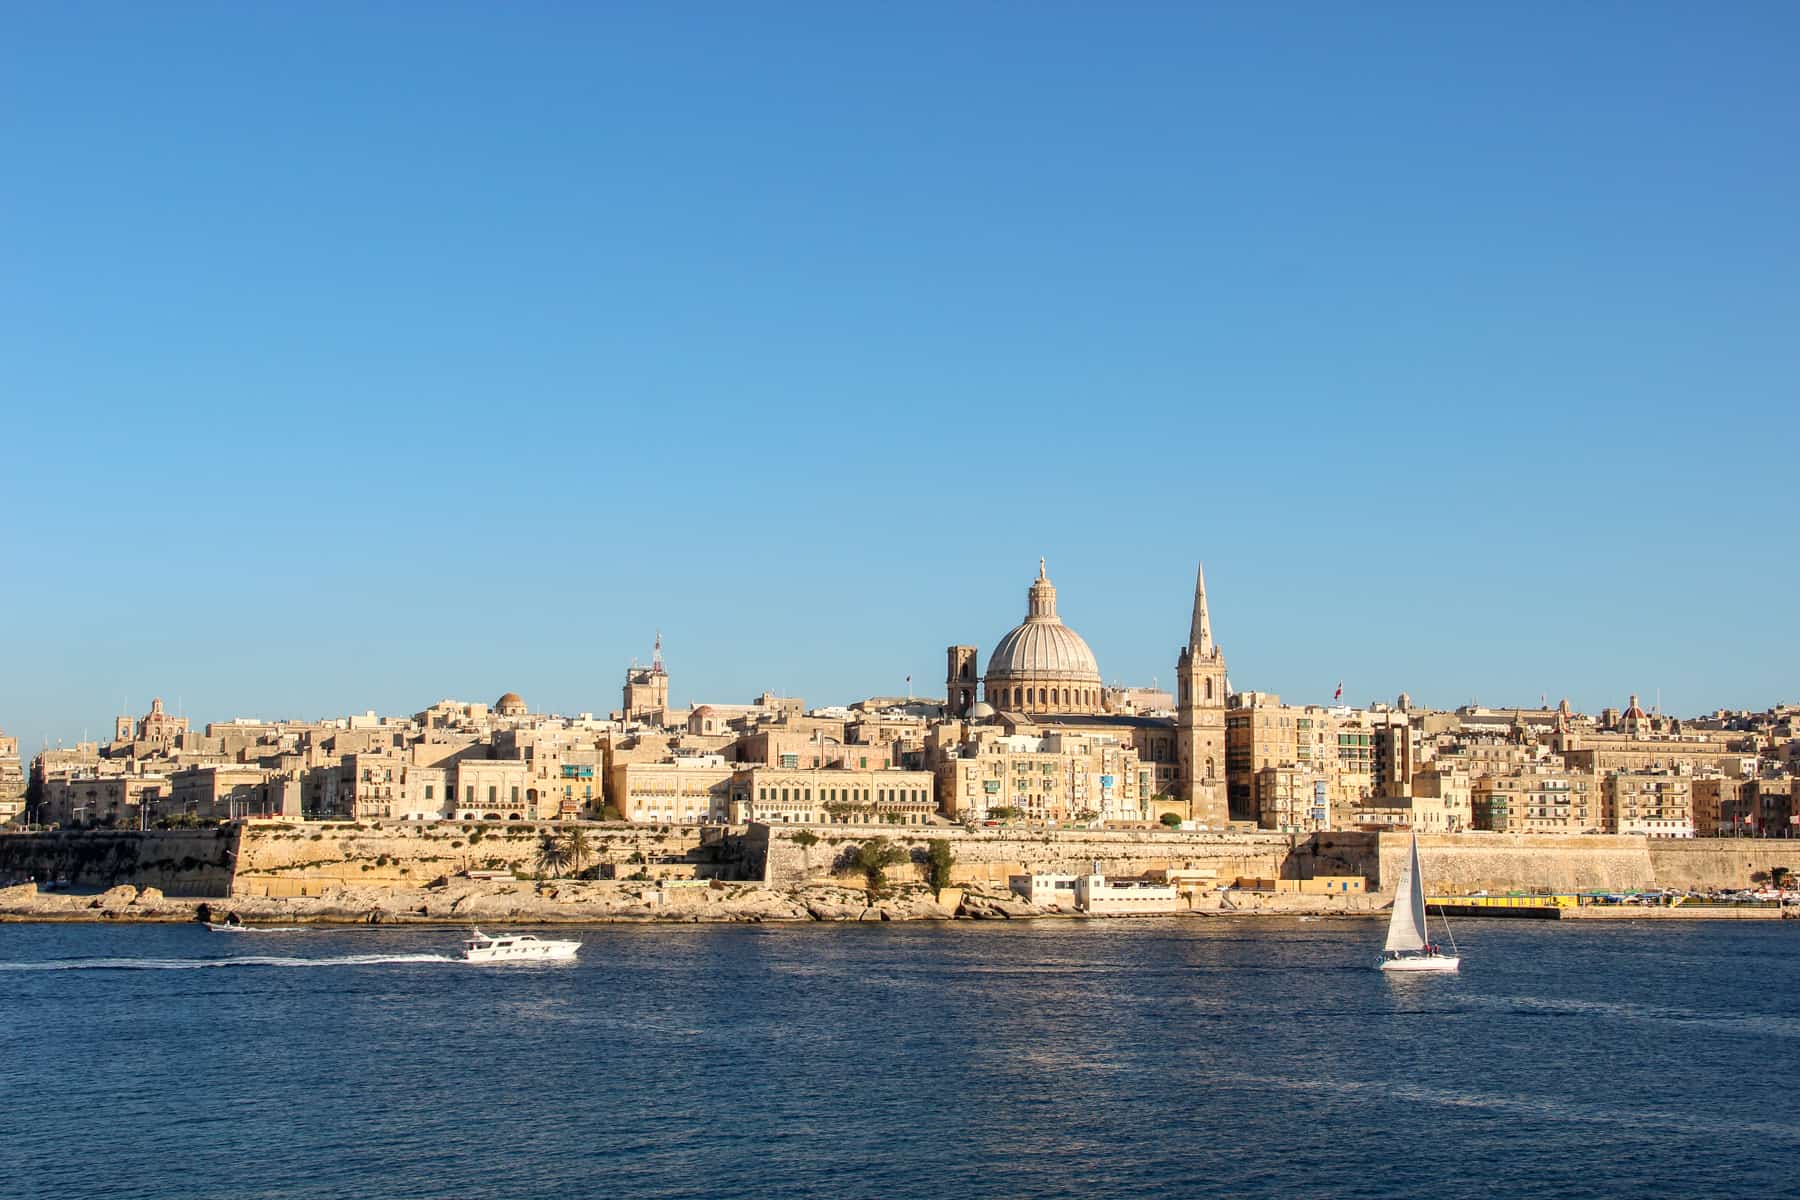 A view to the golden structures, spires and domes of Valletta, Malta. The far view is taken from the sea, where a white boat and a white sailing boat pass by.